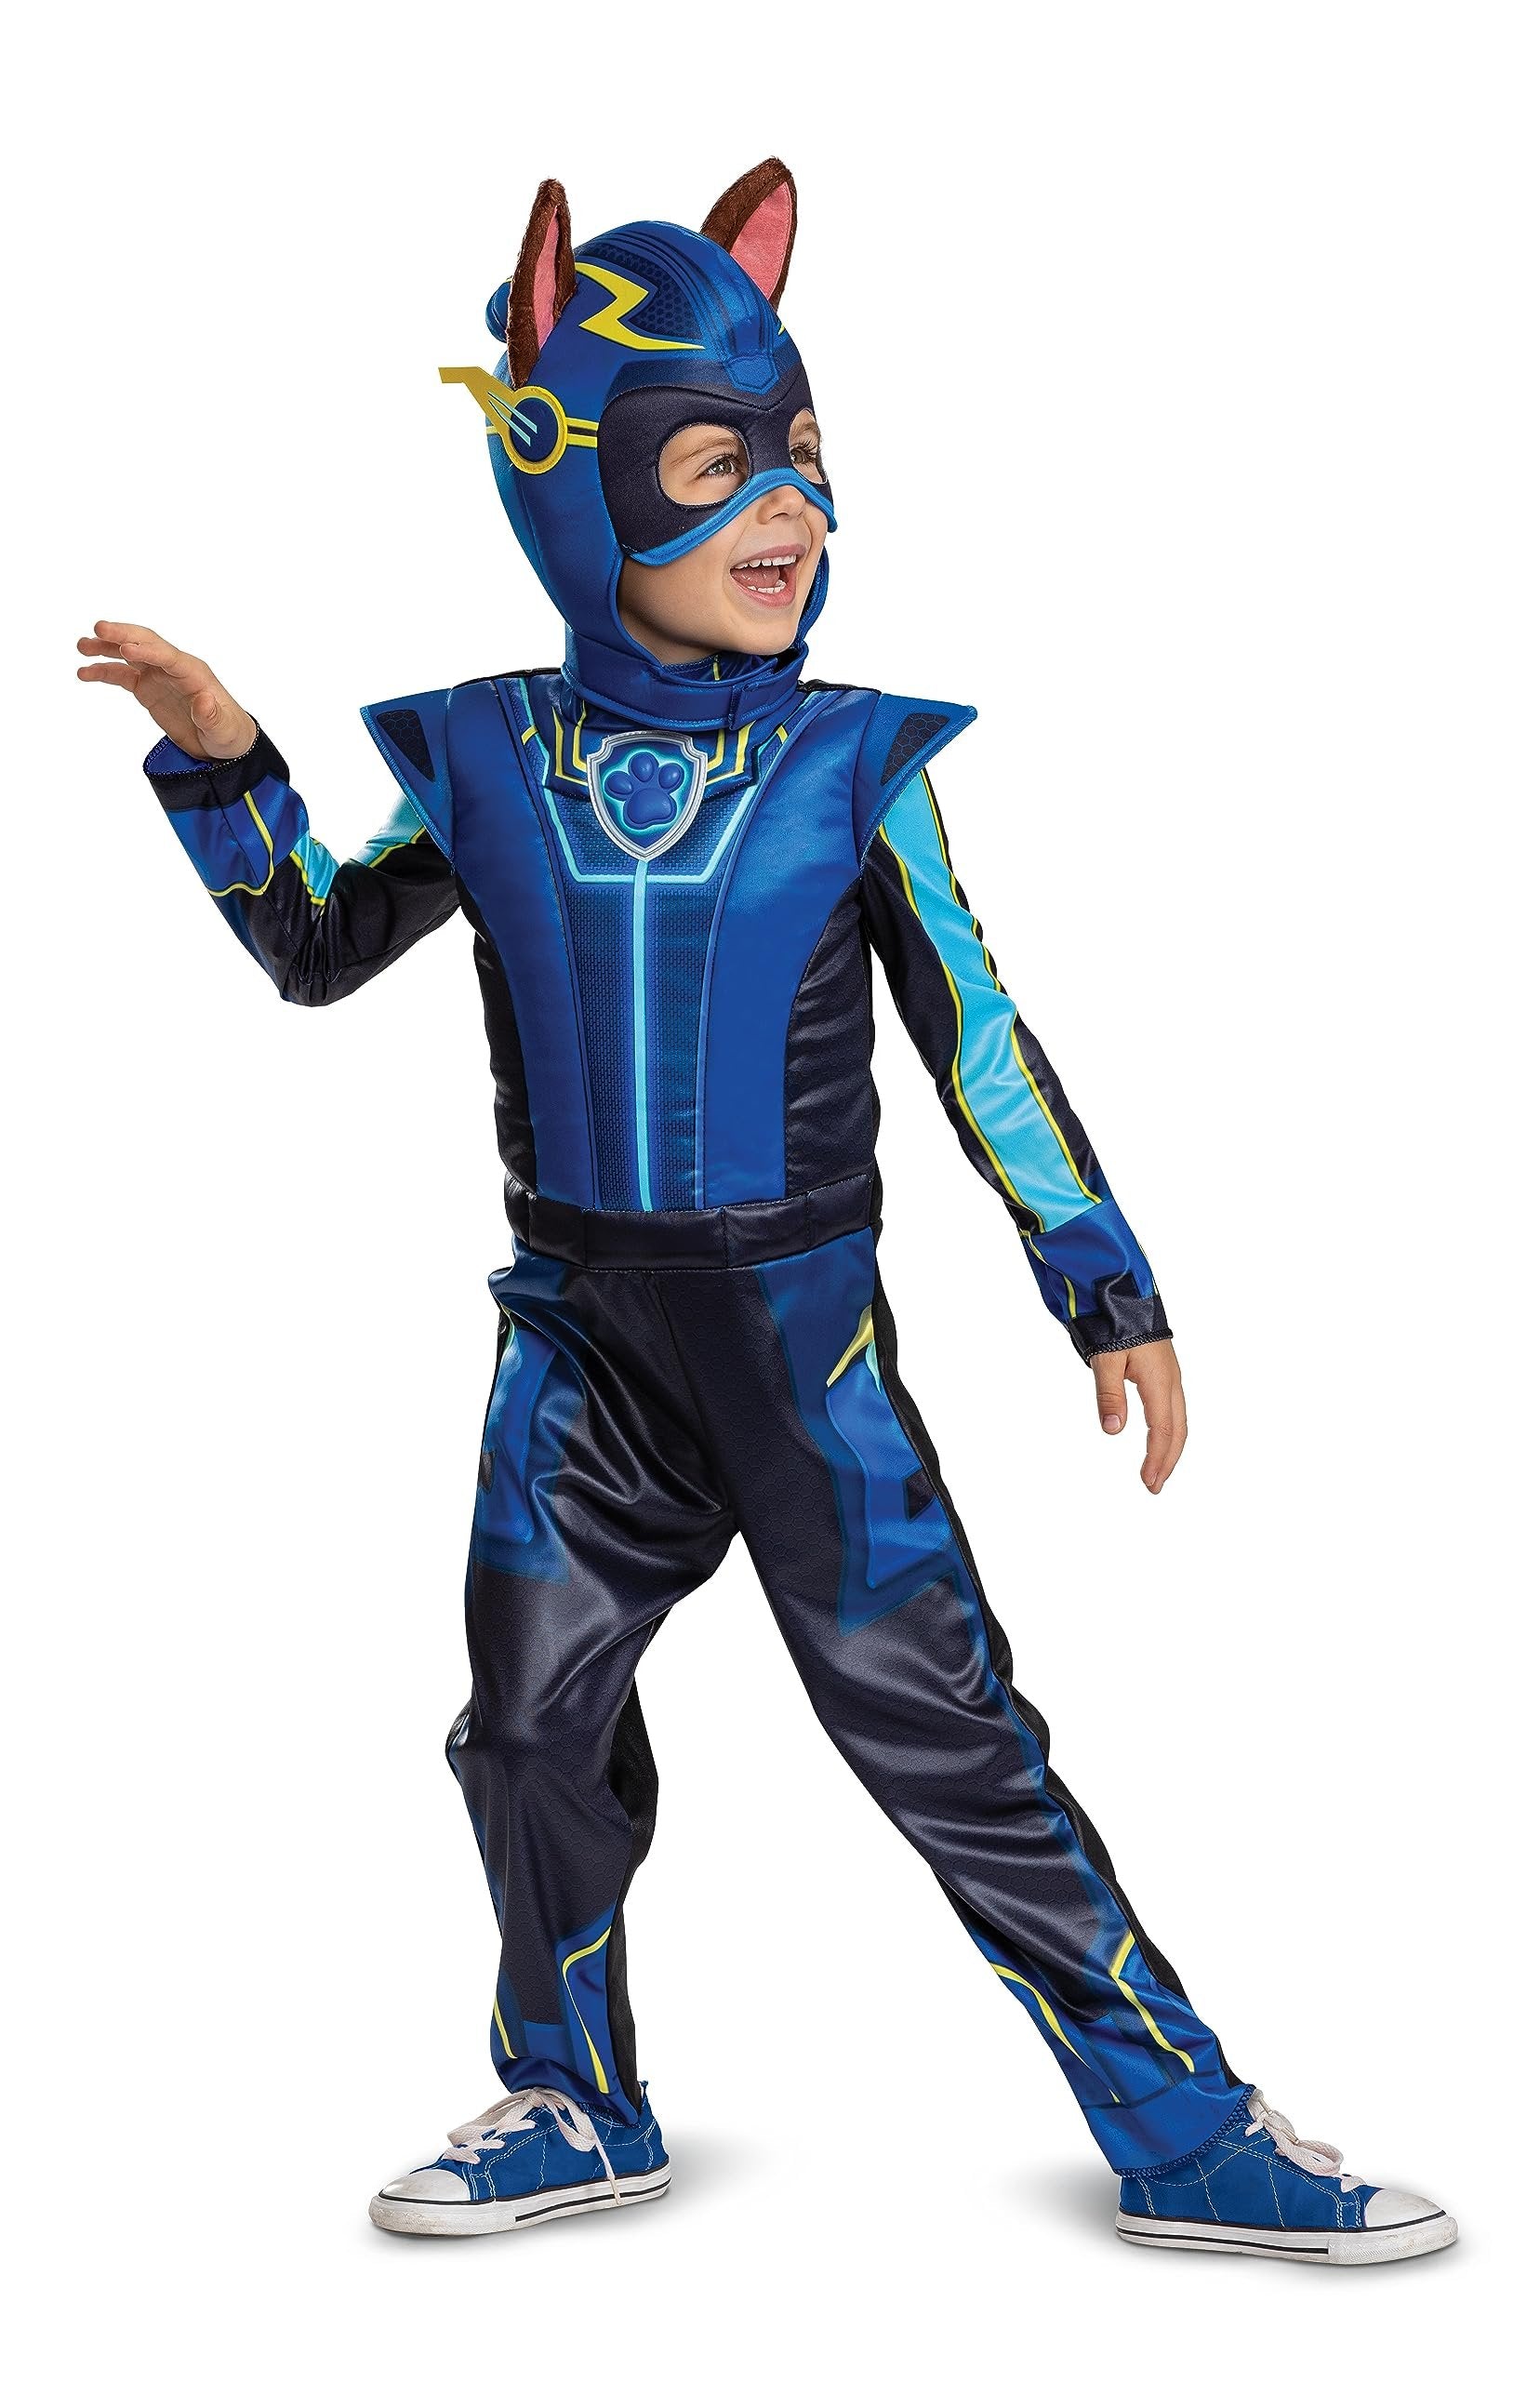 Chase Deluxe Toddler Costume, Official Paw Patrol Halloween Outfit with Armor and Headpiece for Kids, Size (2T)